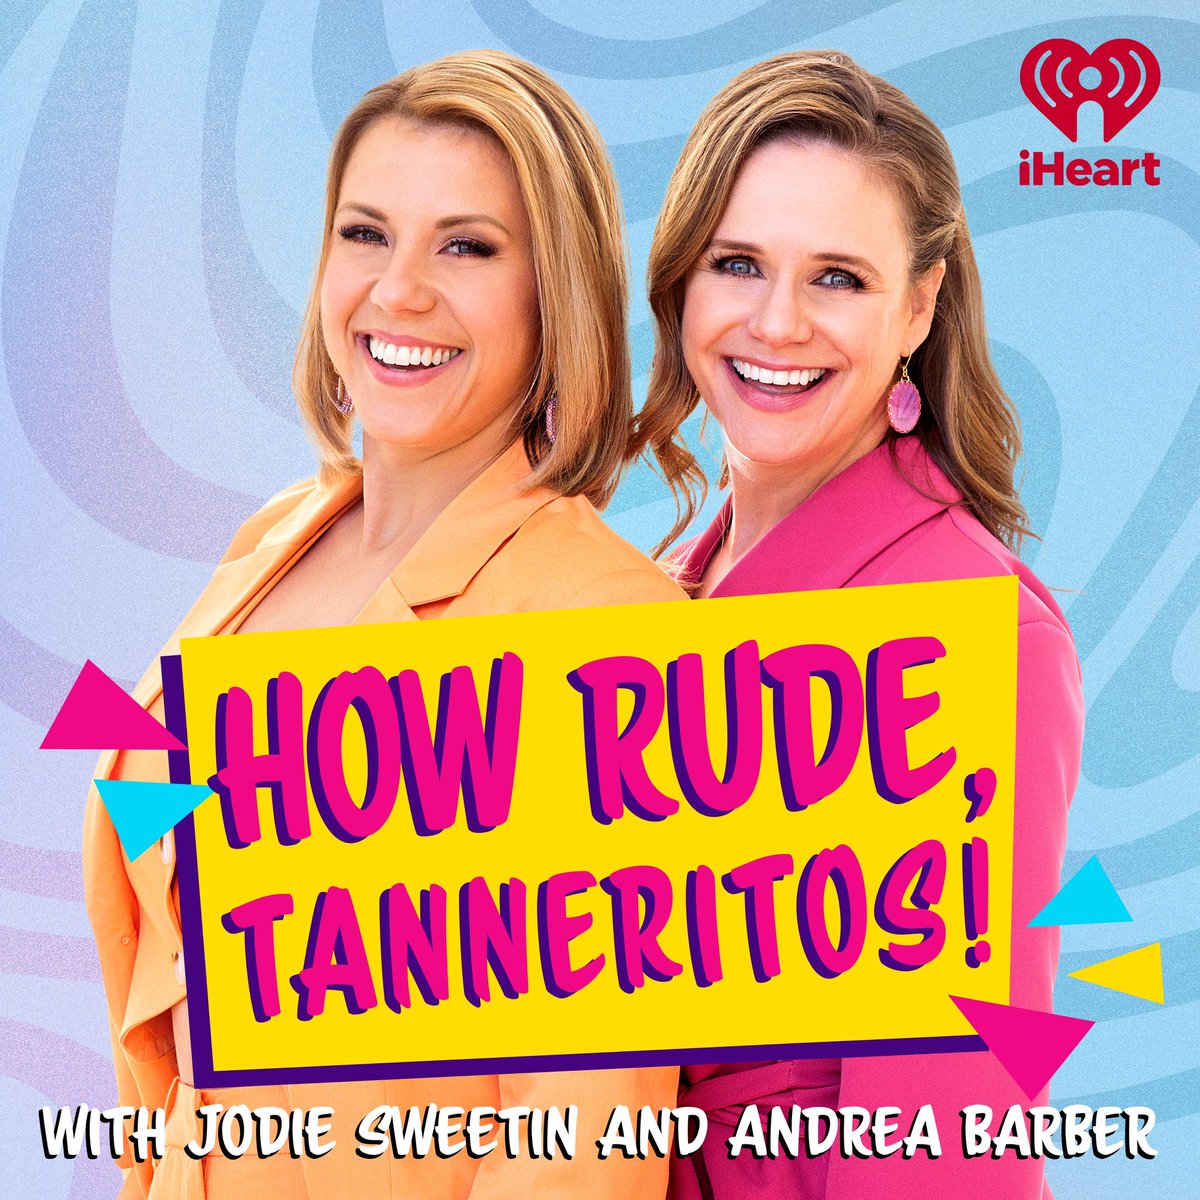 Our new podcast “How Rude, Tanneritos!” is premiering tomorrow! Listen to the trailer NOW and subscribe! Everywhere you listen to podcasts! 🎙️🏡❤️ podcasts.apple.com/us/podcast/how…